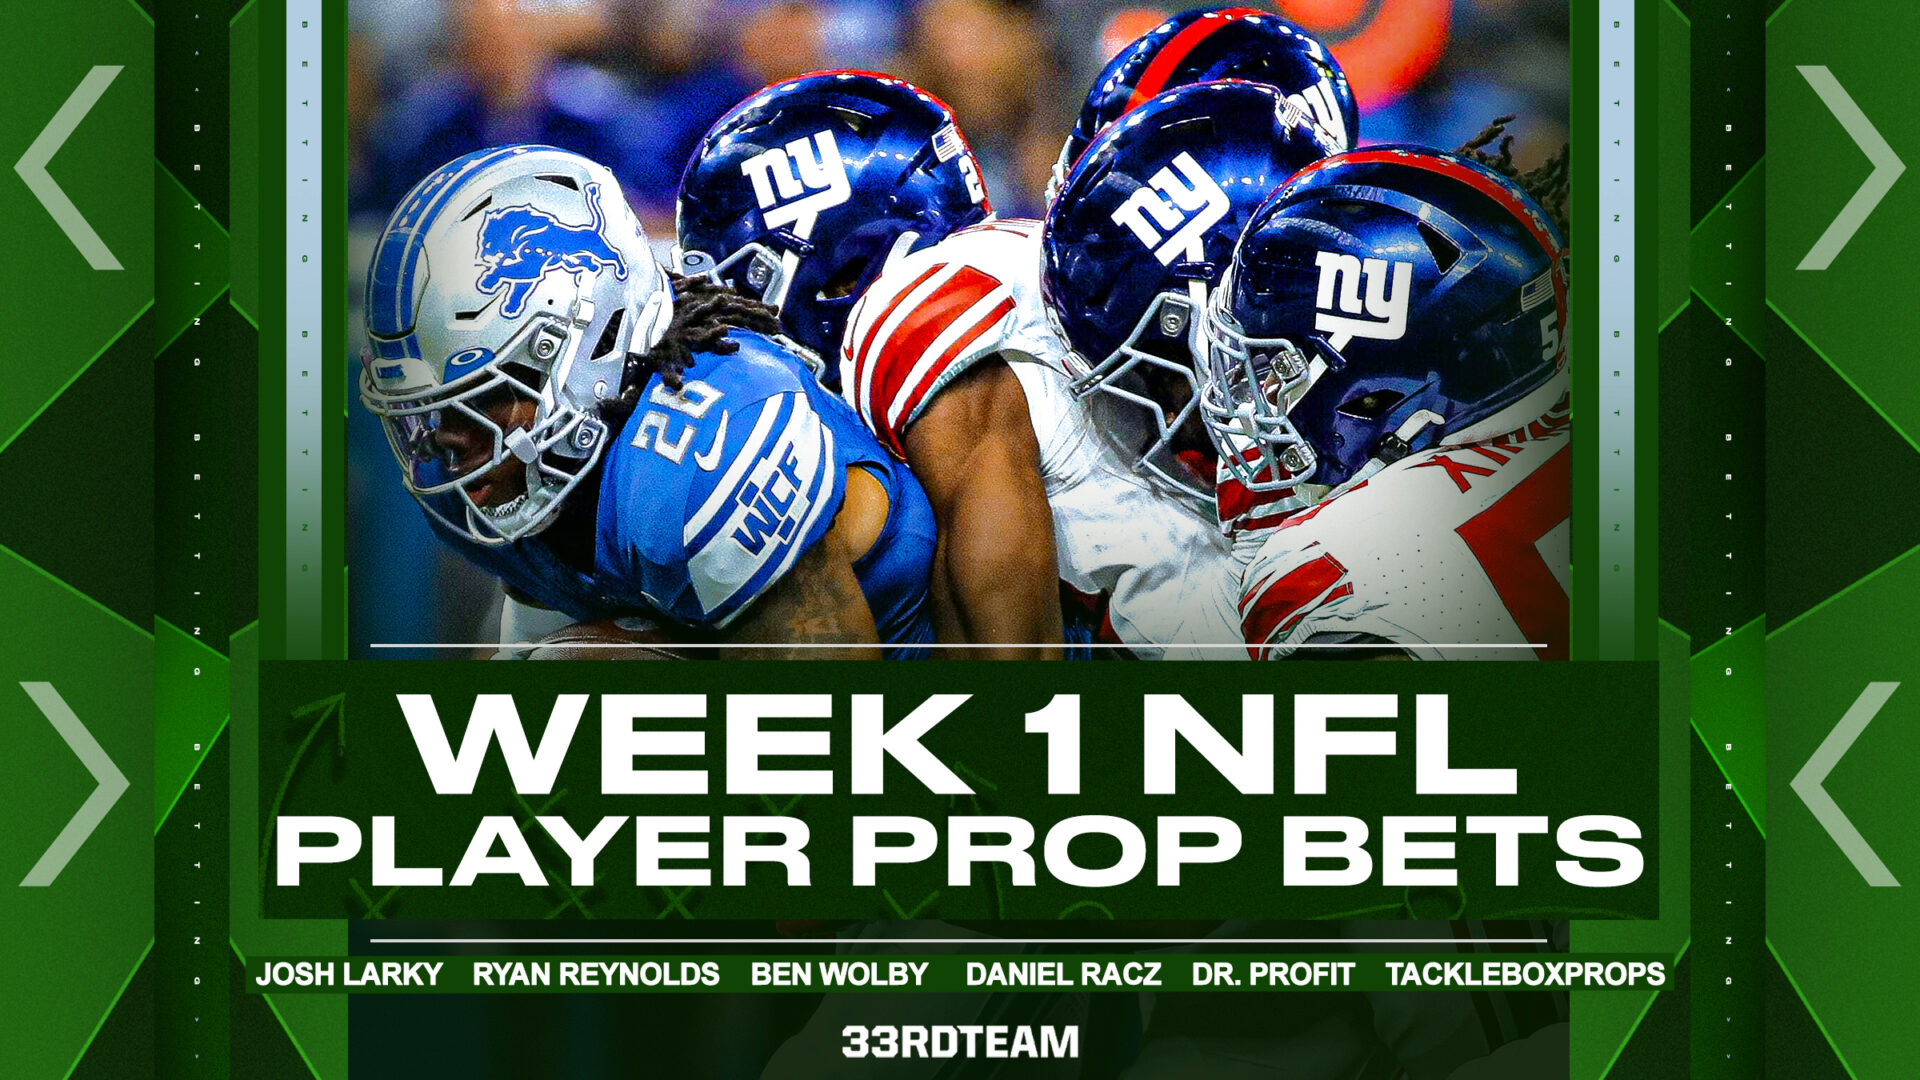 NFL Week 1 Player Prop Bets: Rushing Opportunities Abound